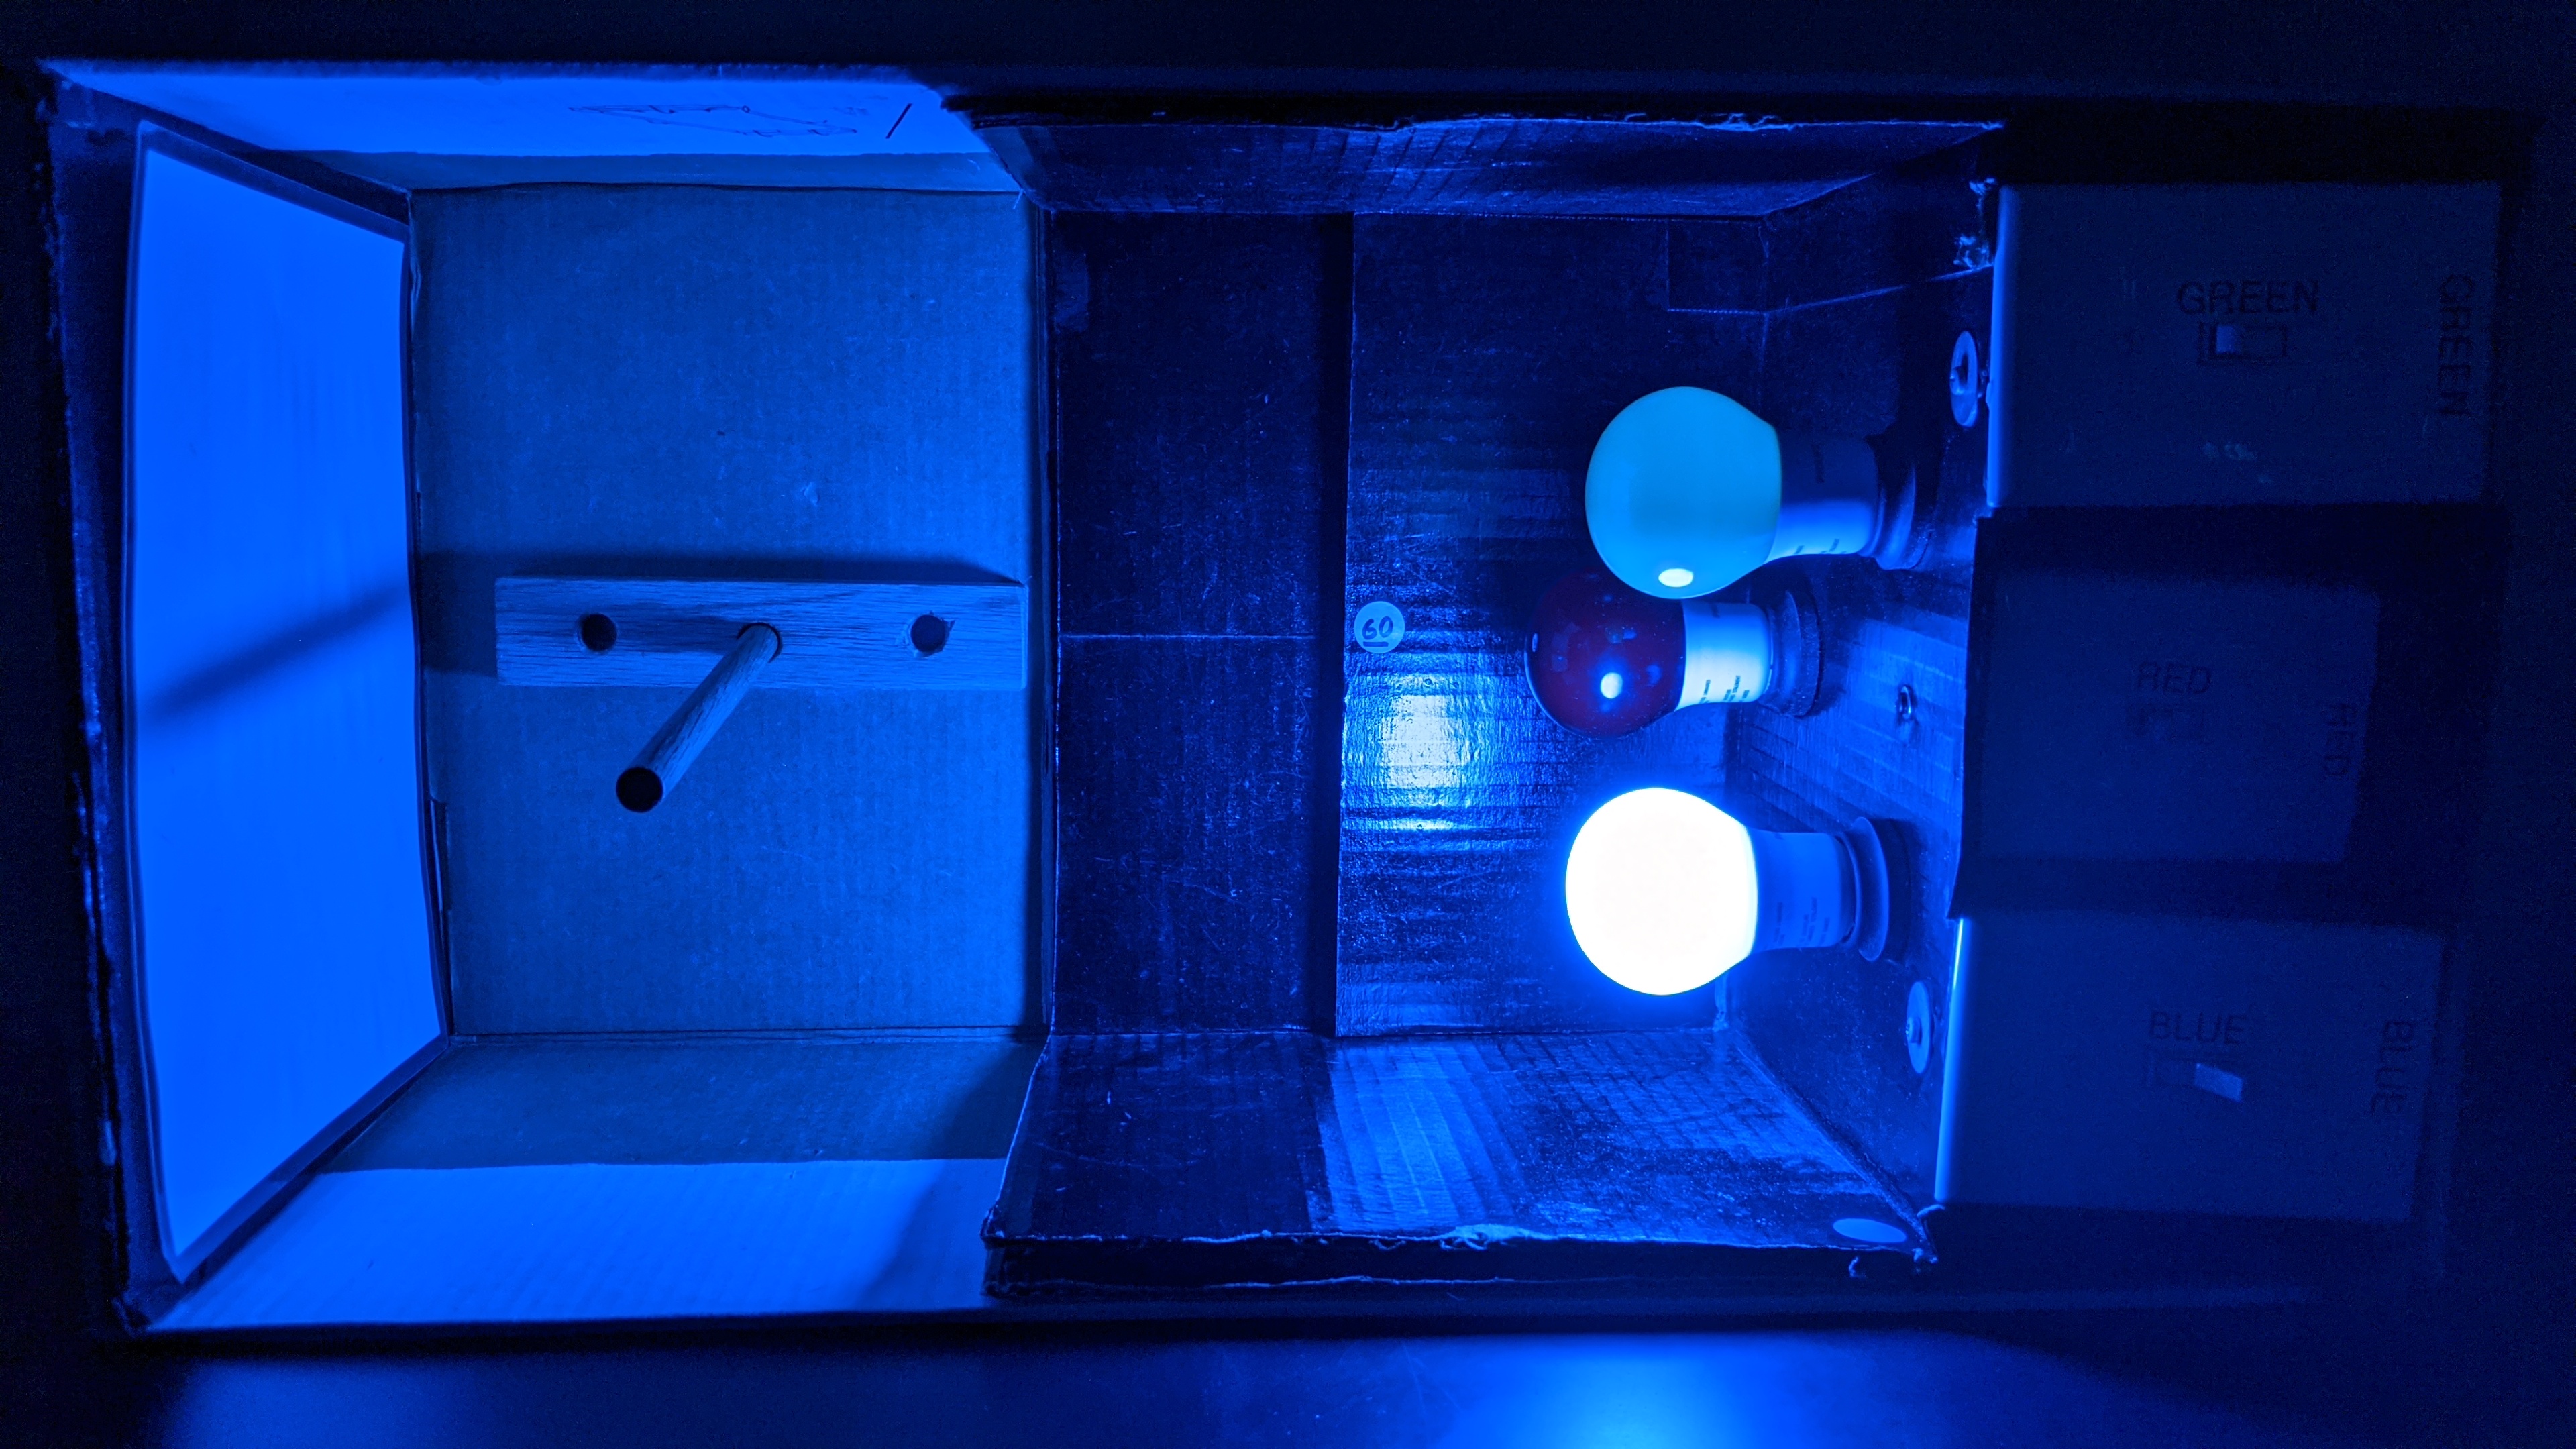 A box with red, green, and blue light bulbs, switches to turn each on or off individually, and a small post to cast a shadow